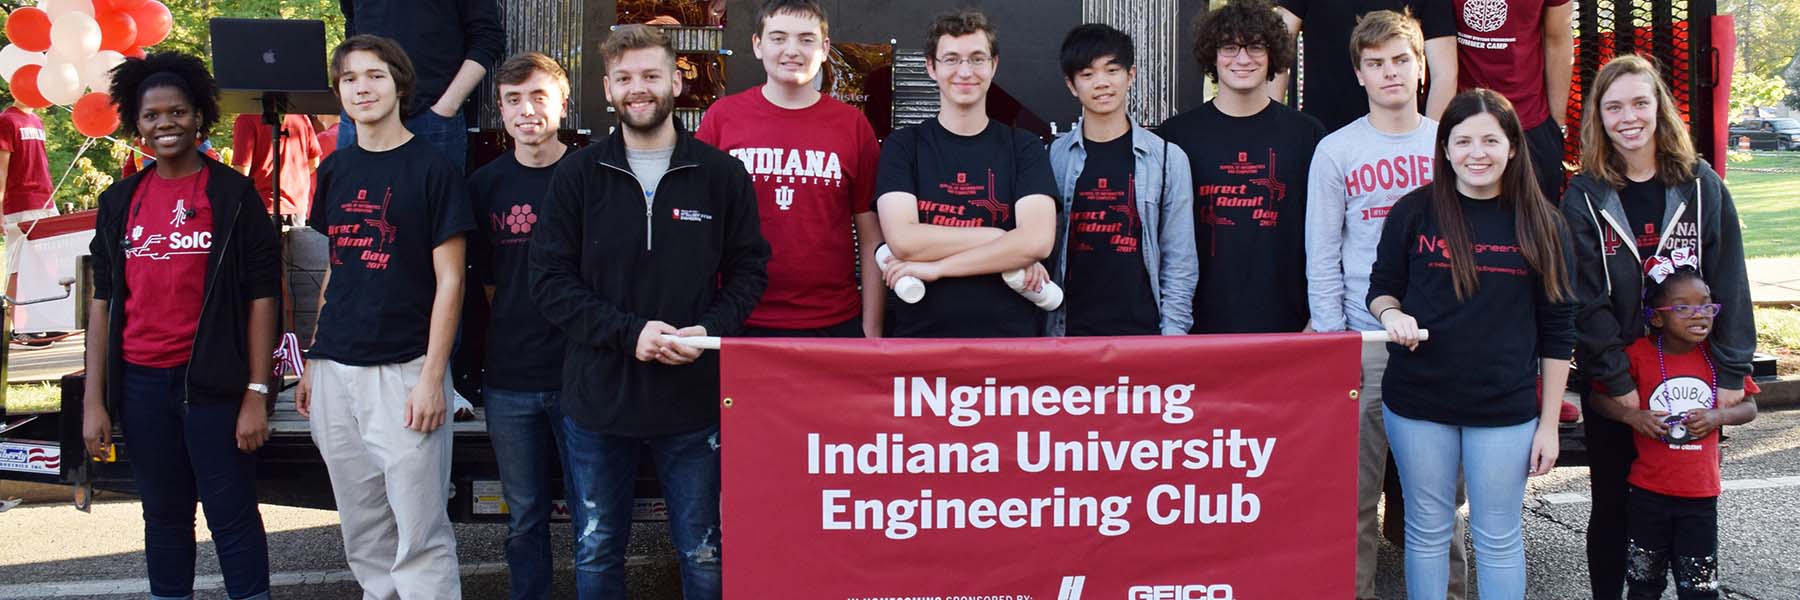 A group of students from the INgineering Indiana University Engineering Club stand together.